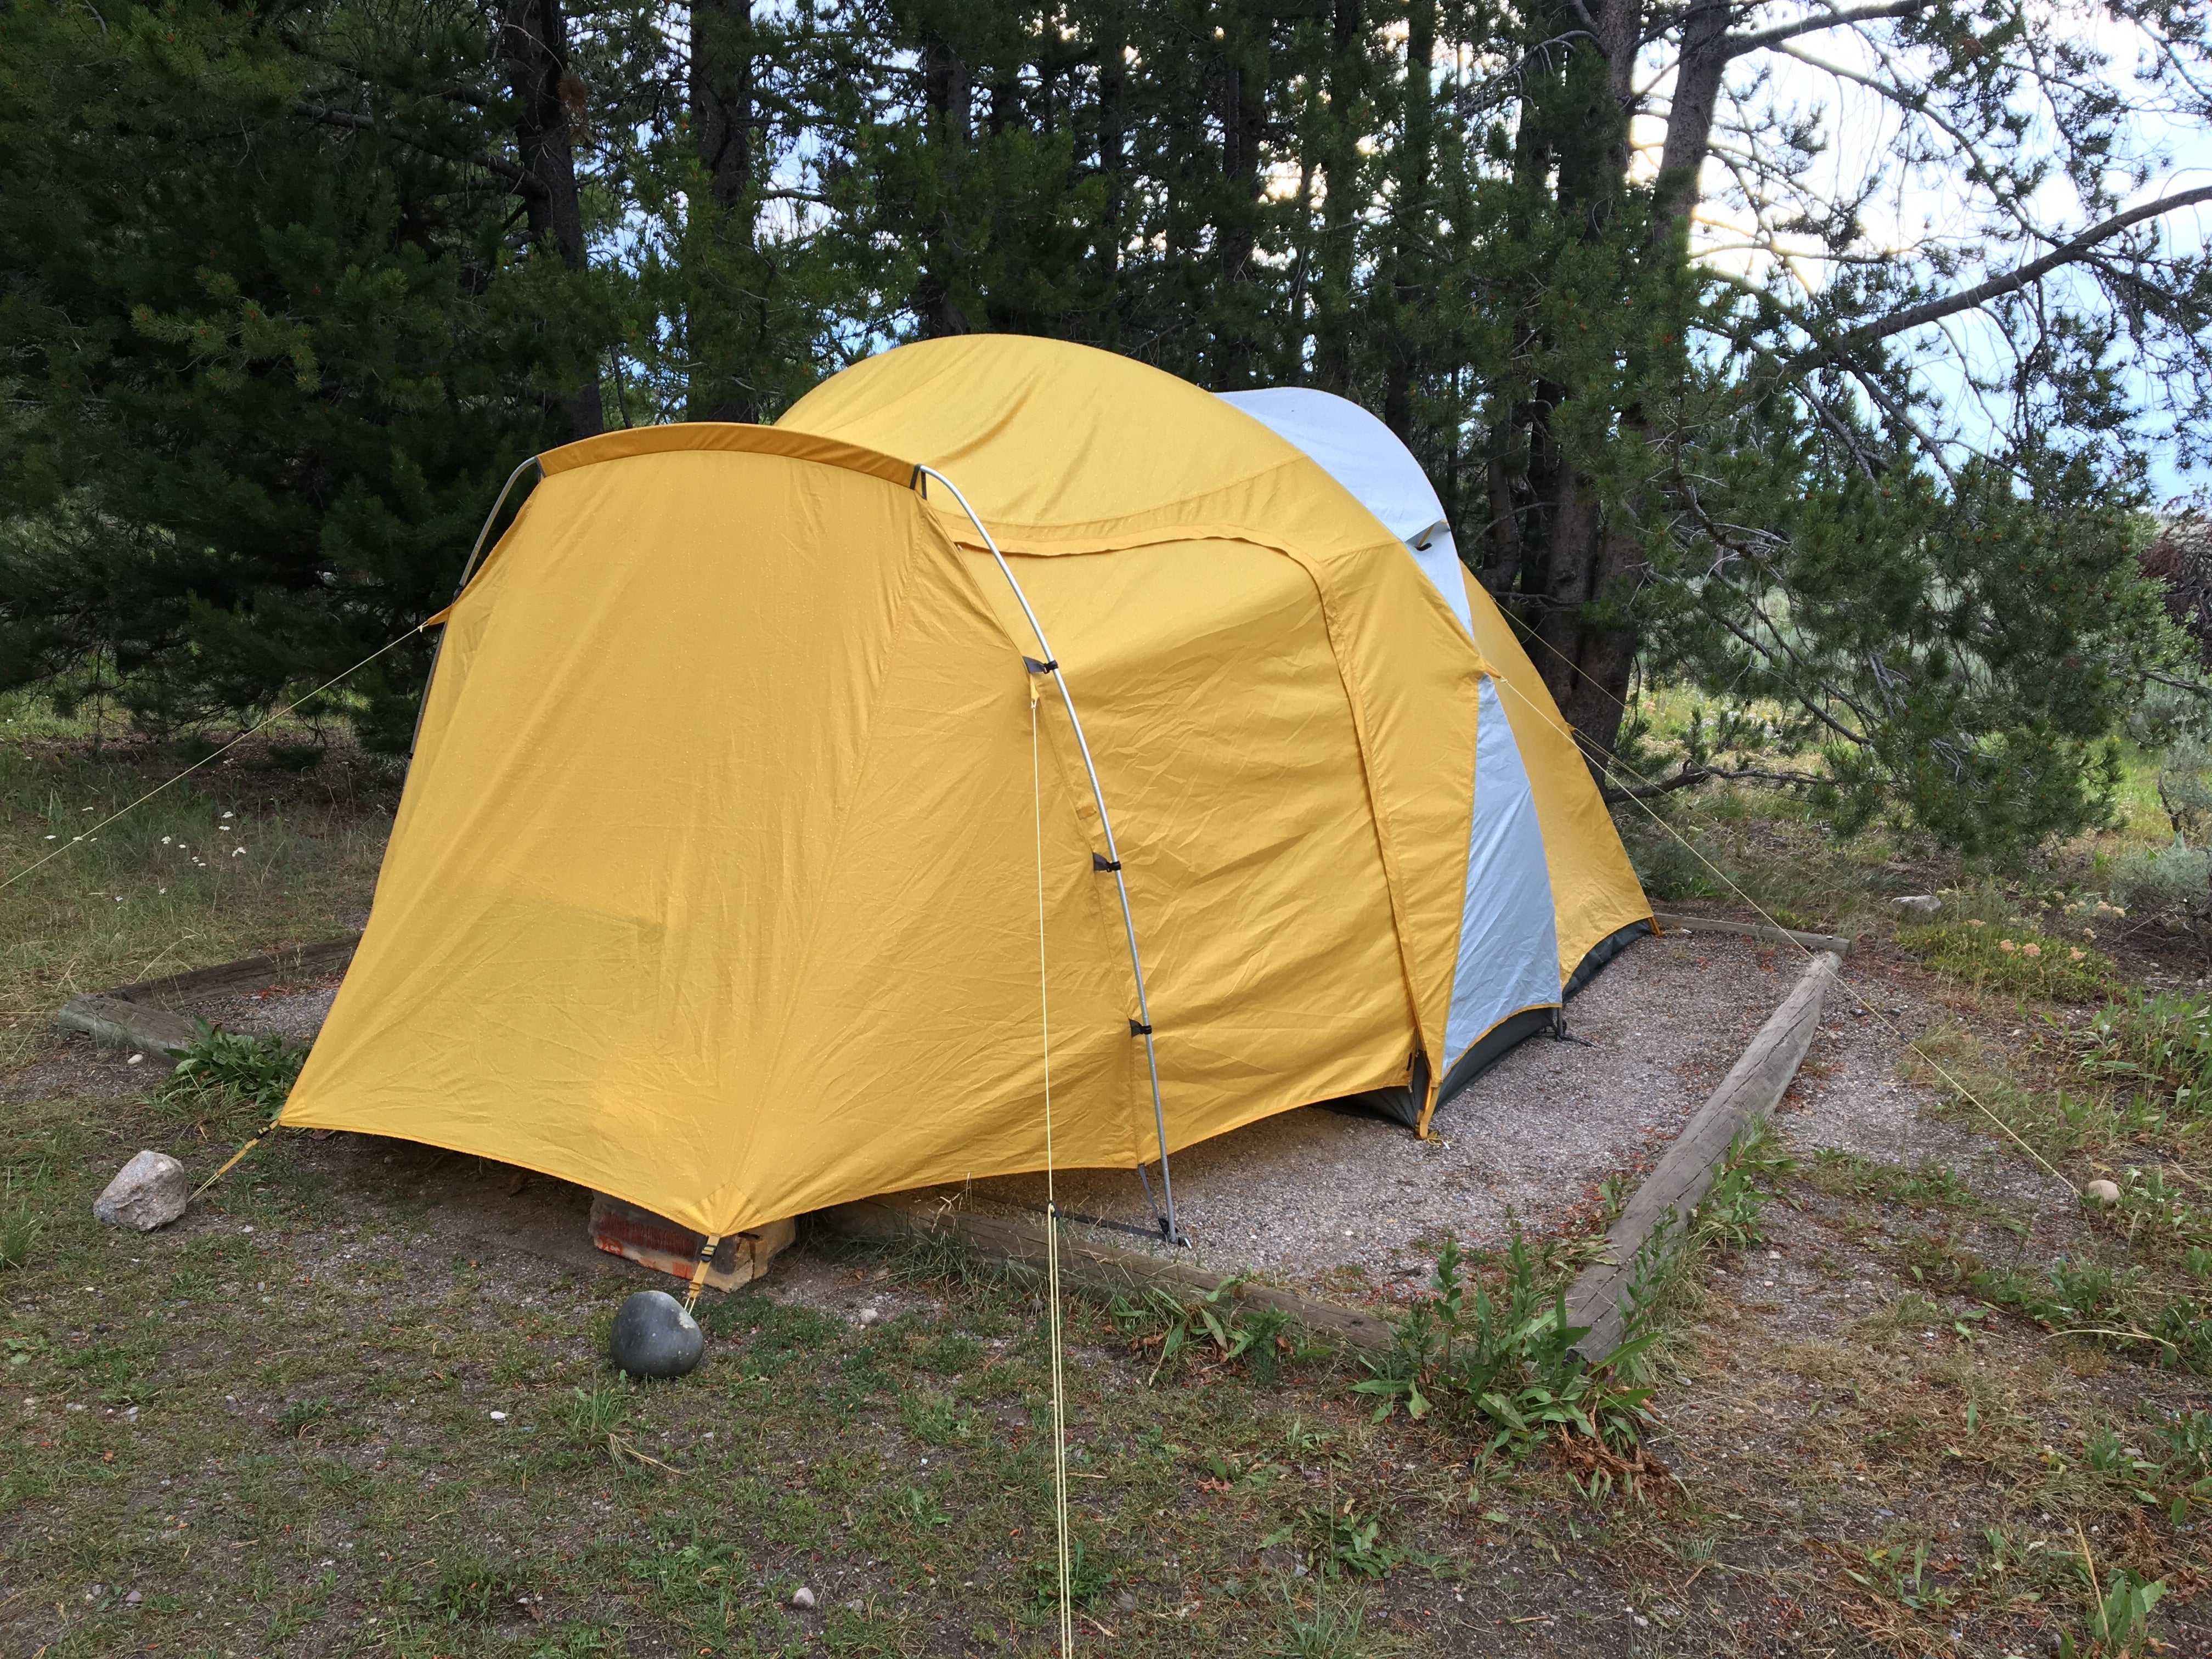 Our site had one of the larger tent pads.